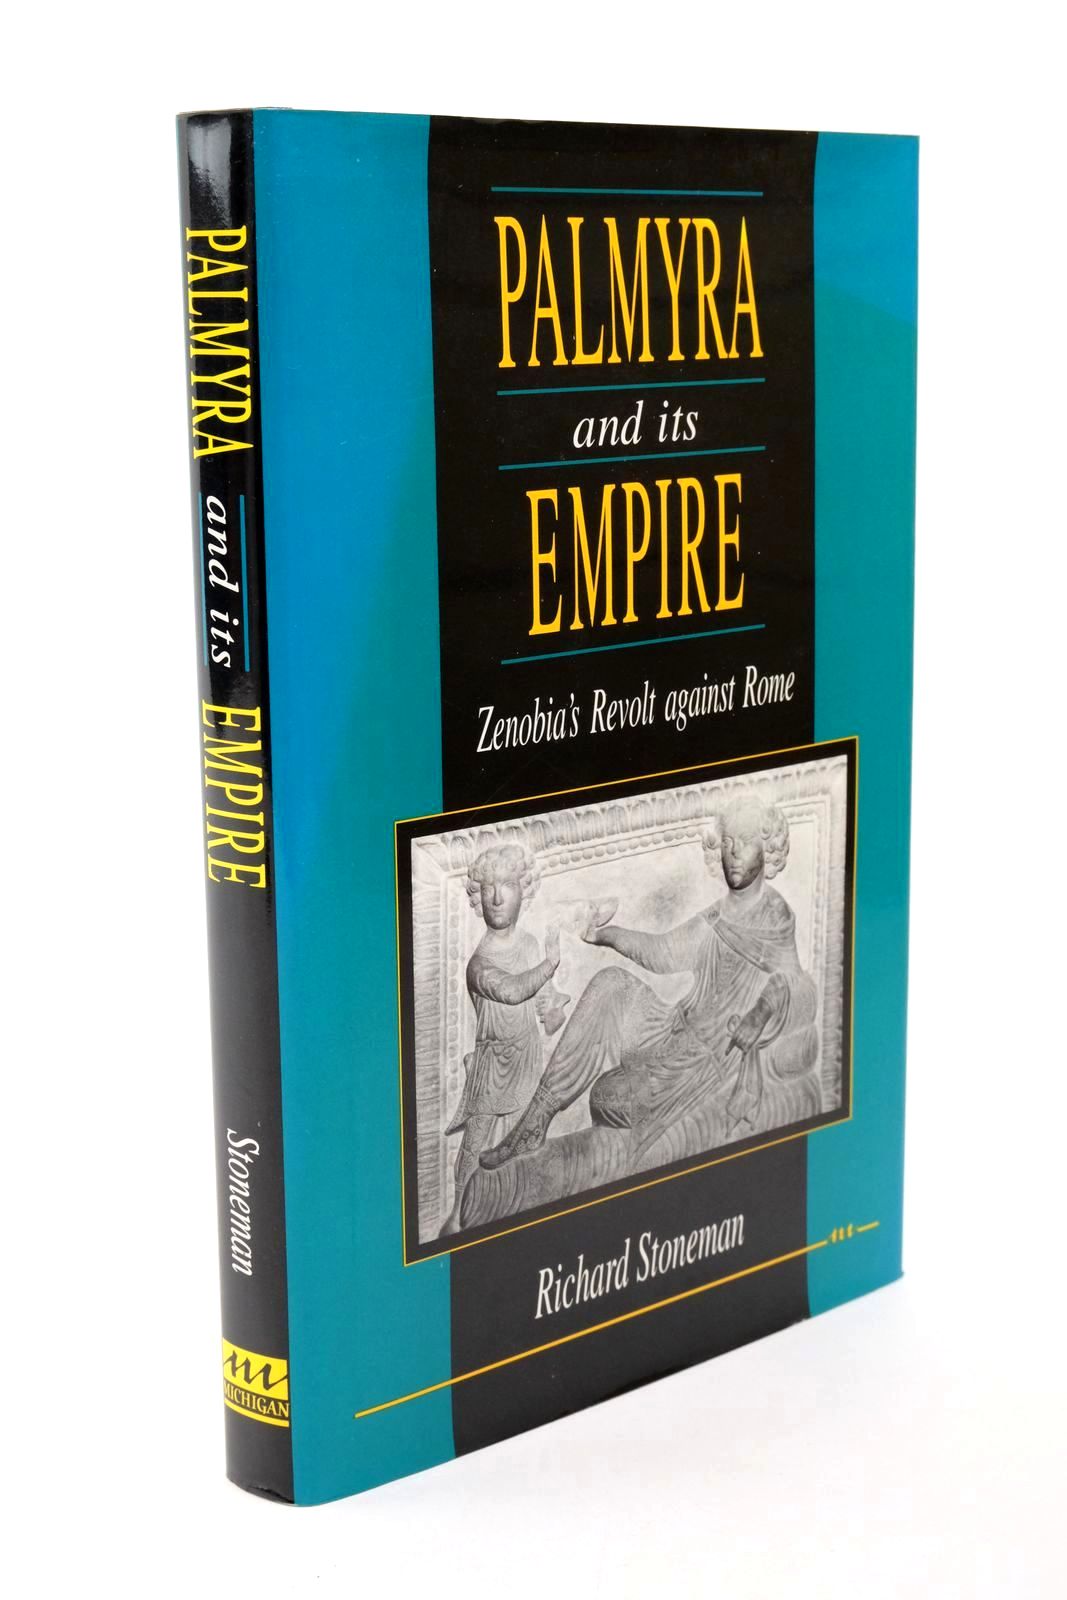 Photo of PALMYRA AND ITS EMPIRE written by Stoneman, Richard published by University Of Michigan Press (STOCK CODE: 1322605)  for sale by Stella & Rose's Books